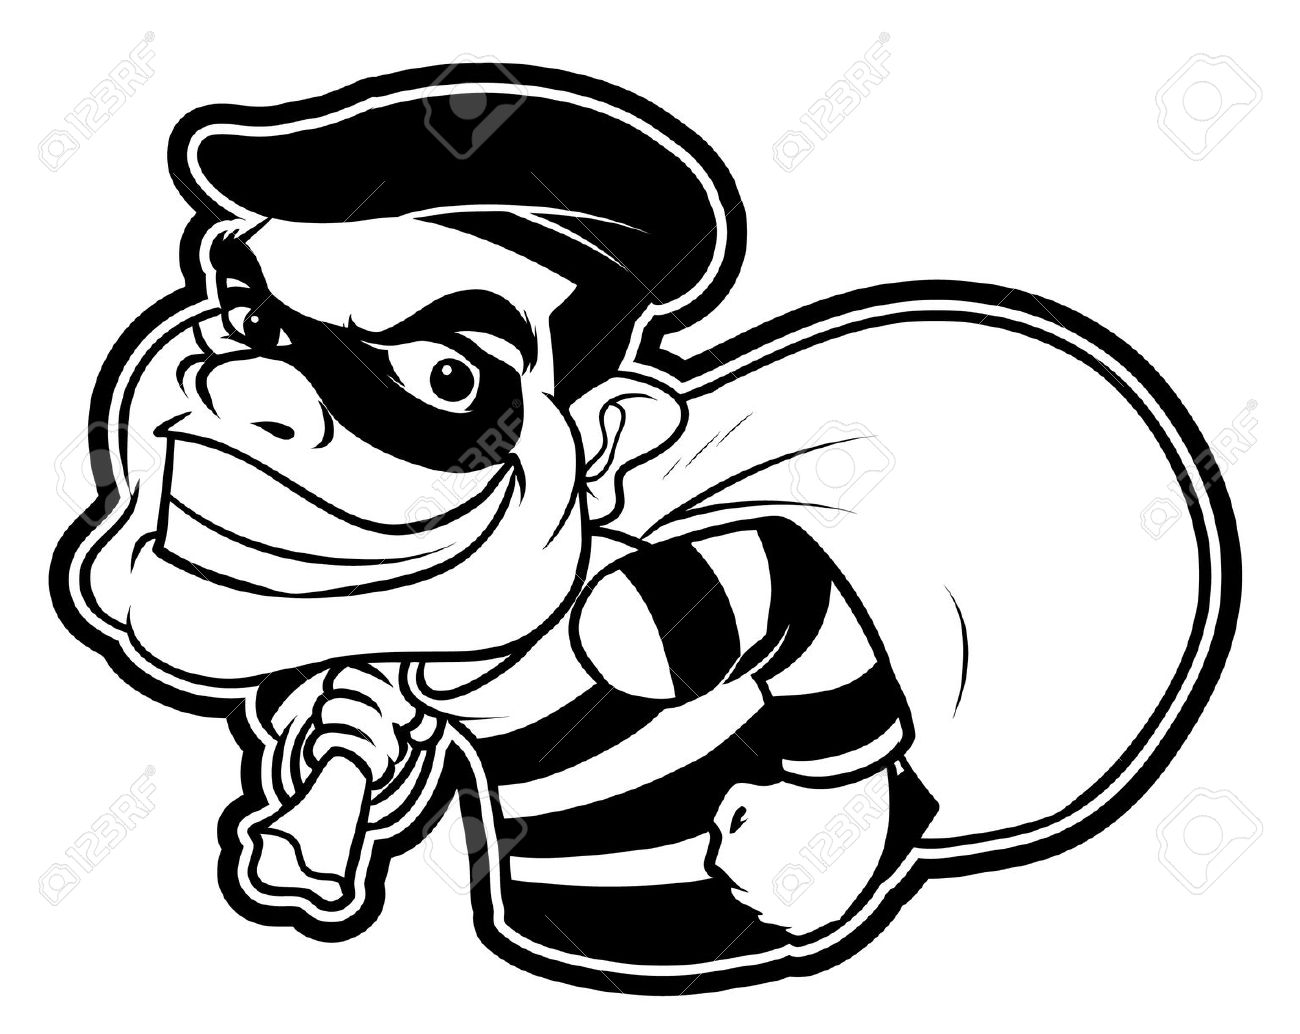 Picture Of A Robber.